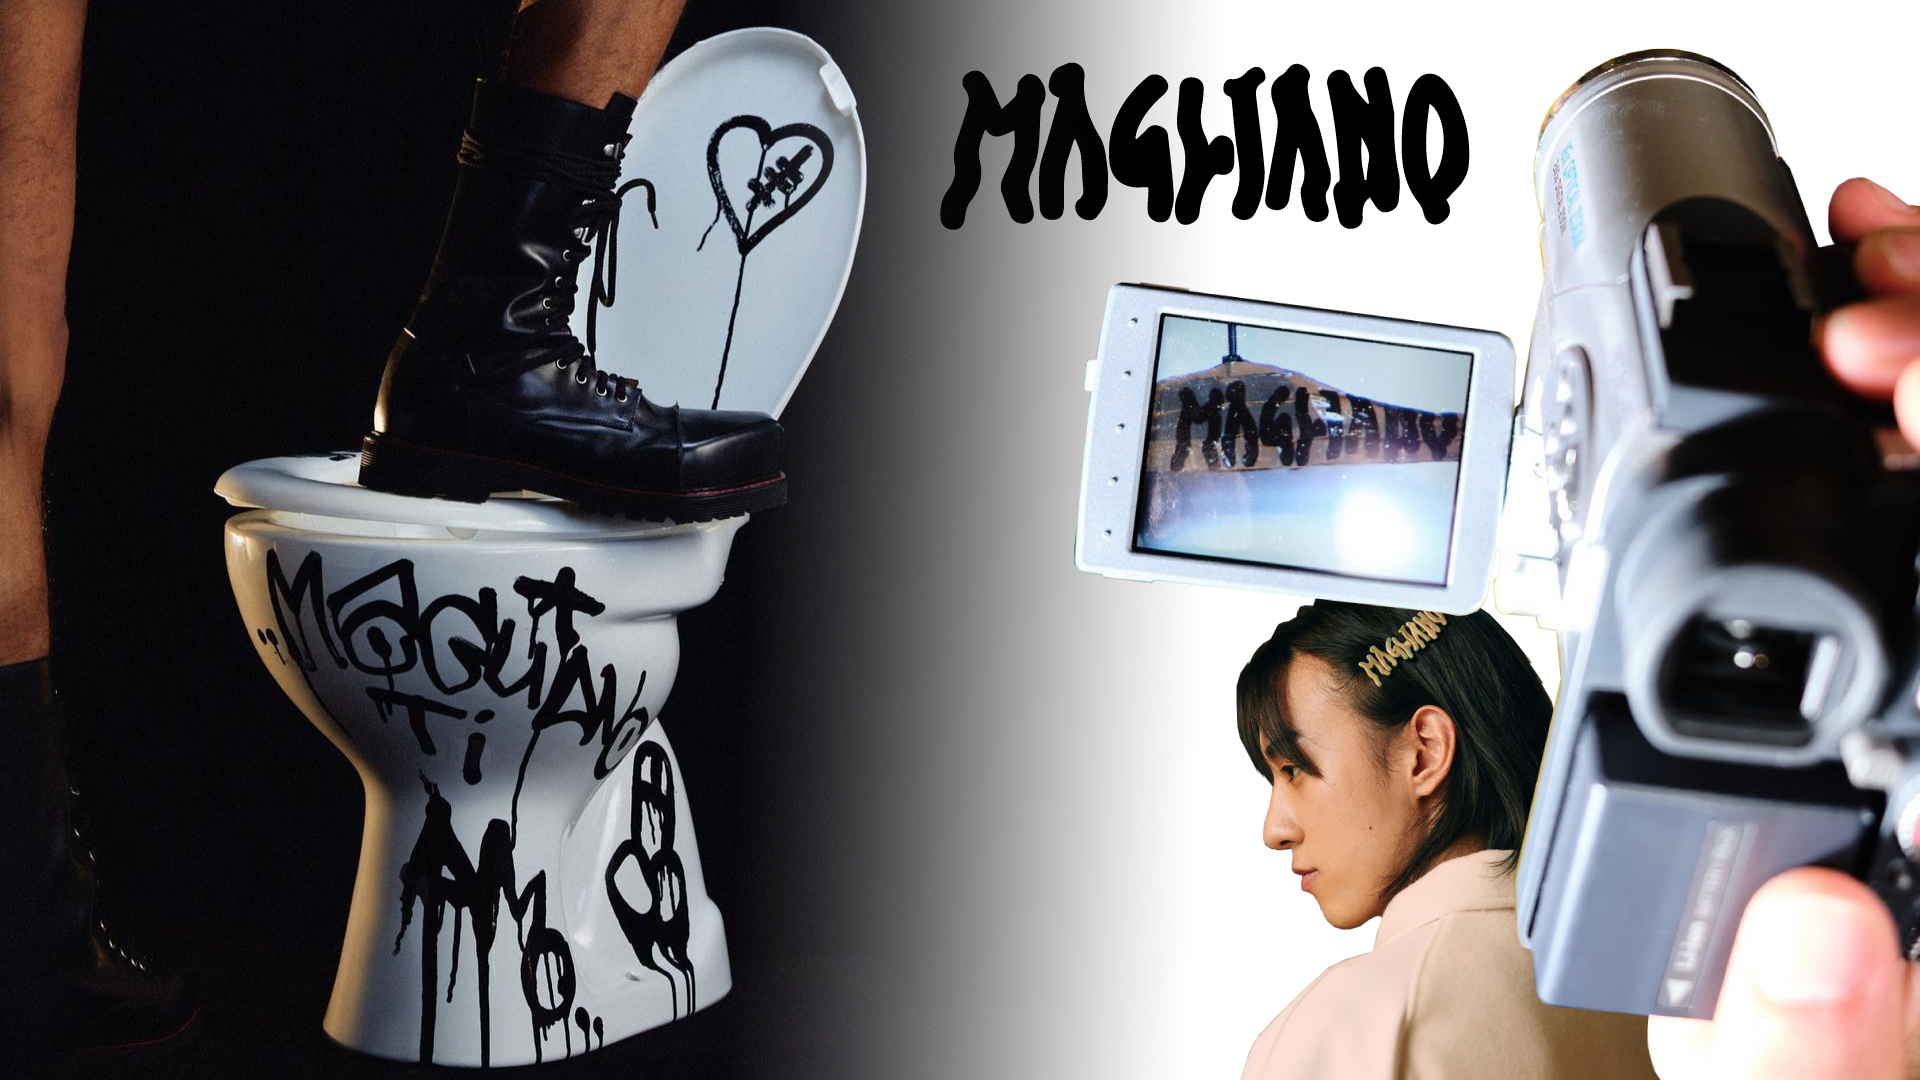 Chaotic Elegance: Introducing, Magliano